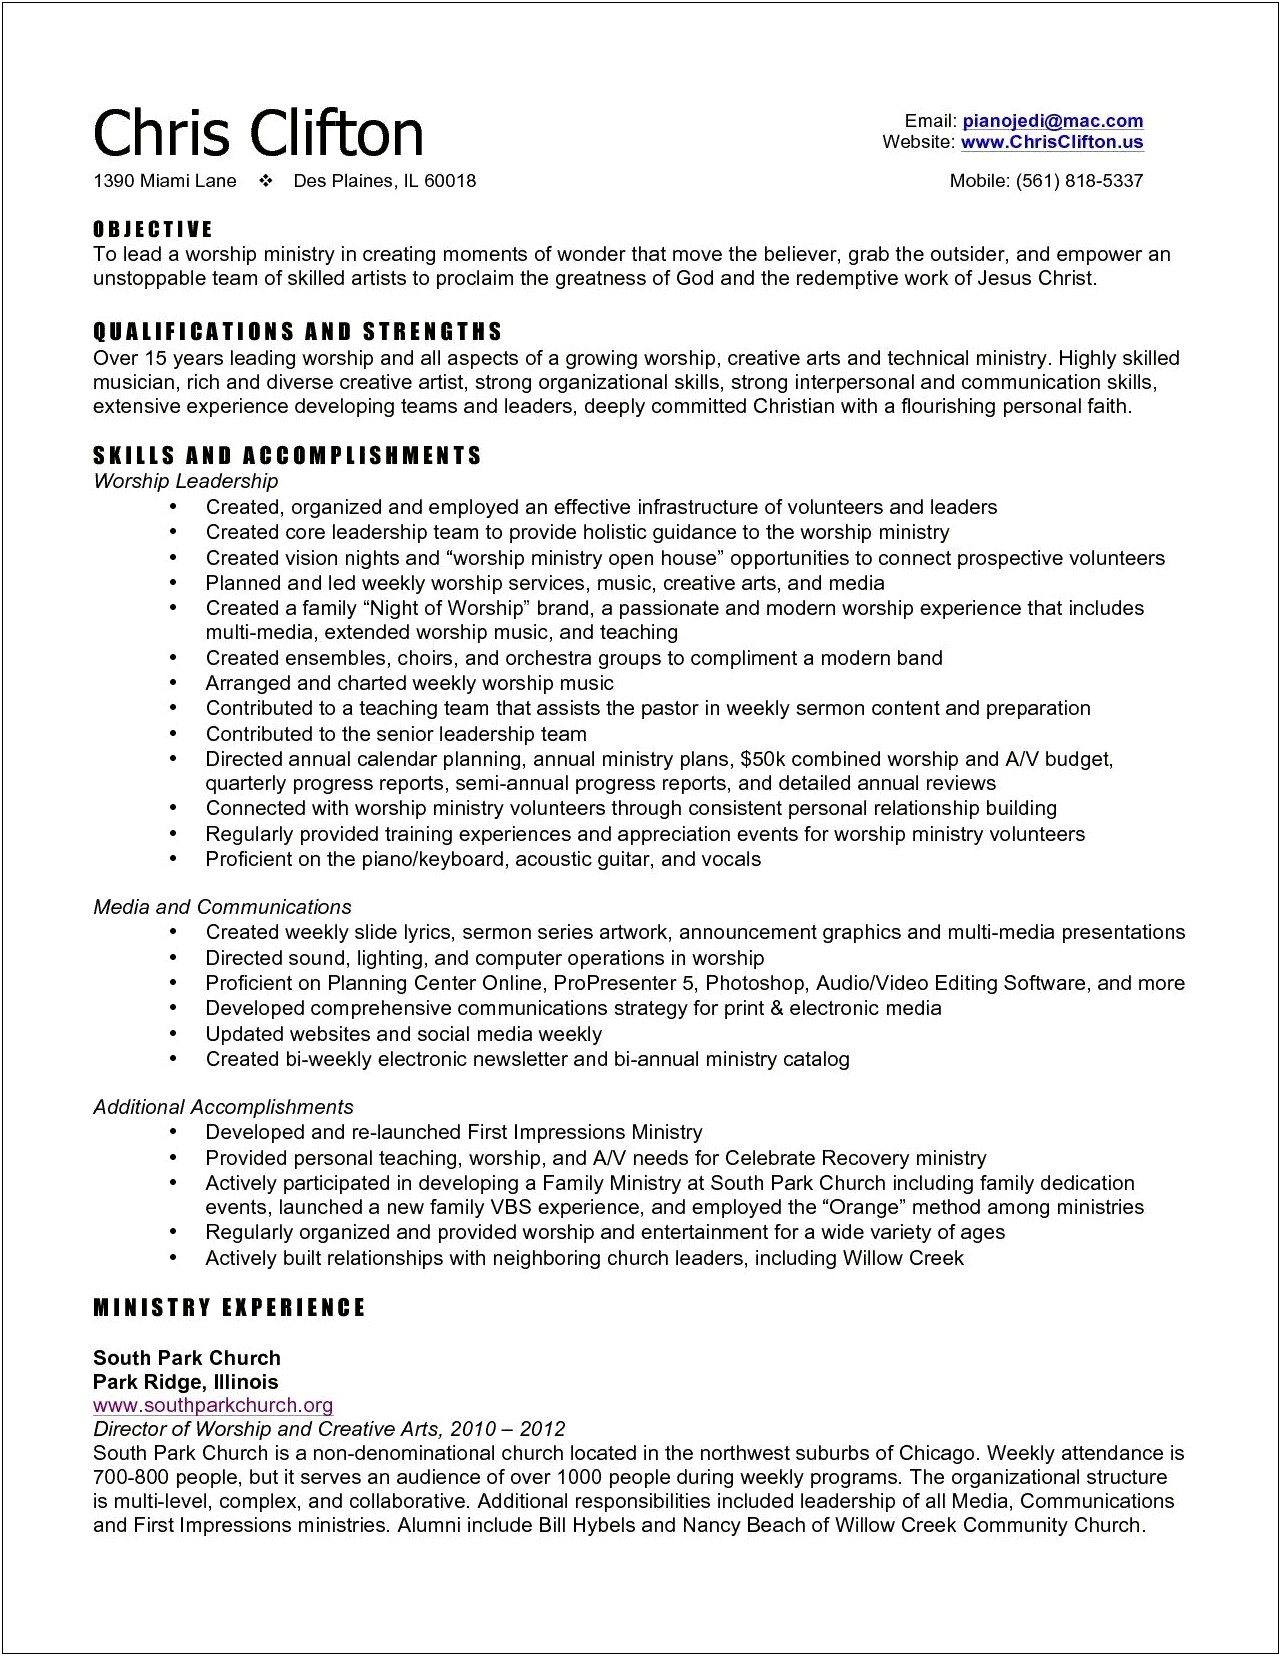 Receptionist Skills Qualifications And Strengths For Resume